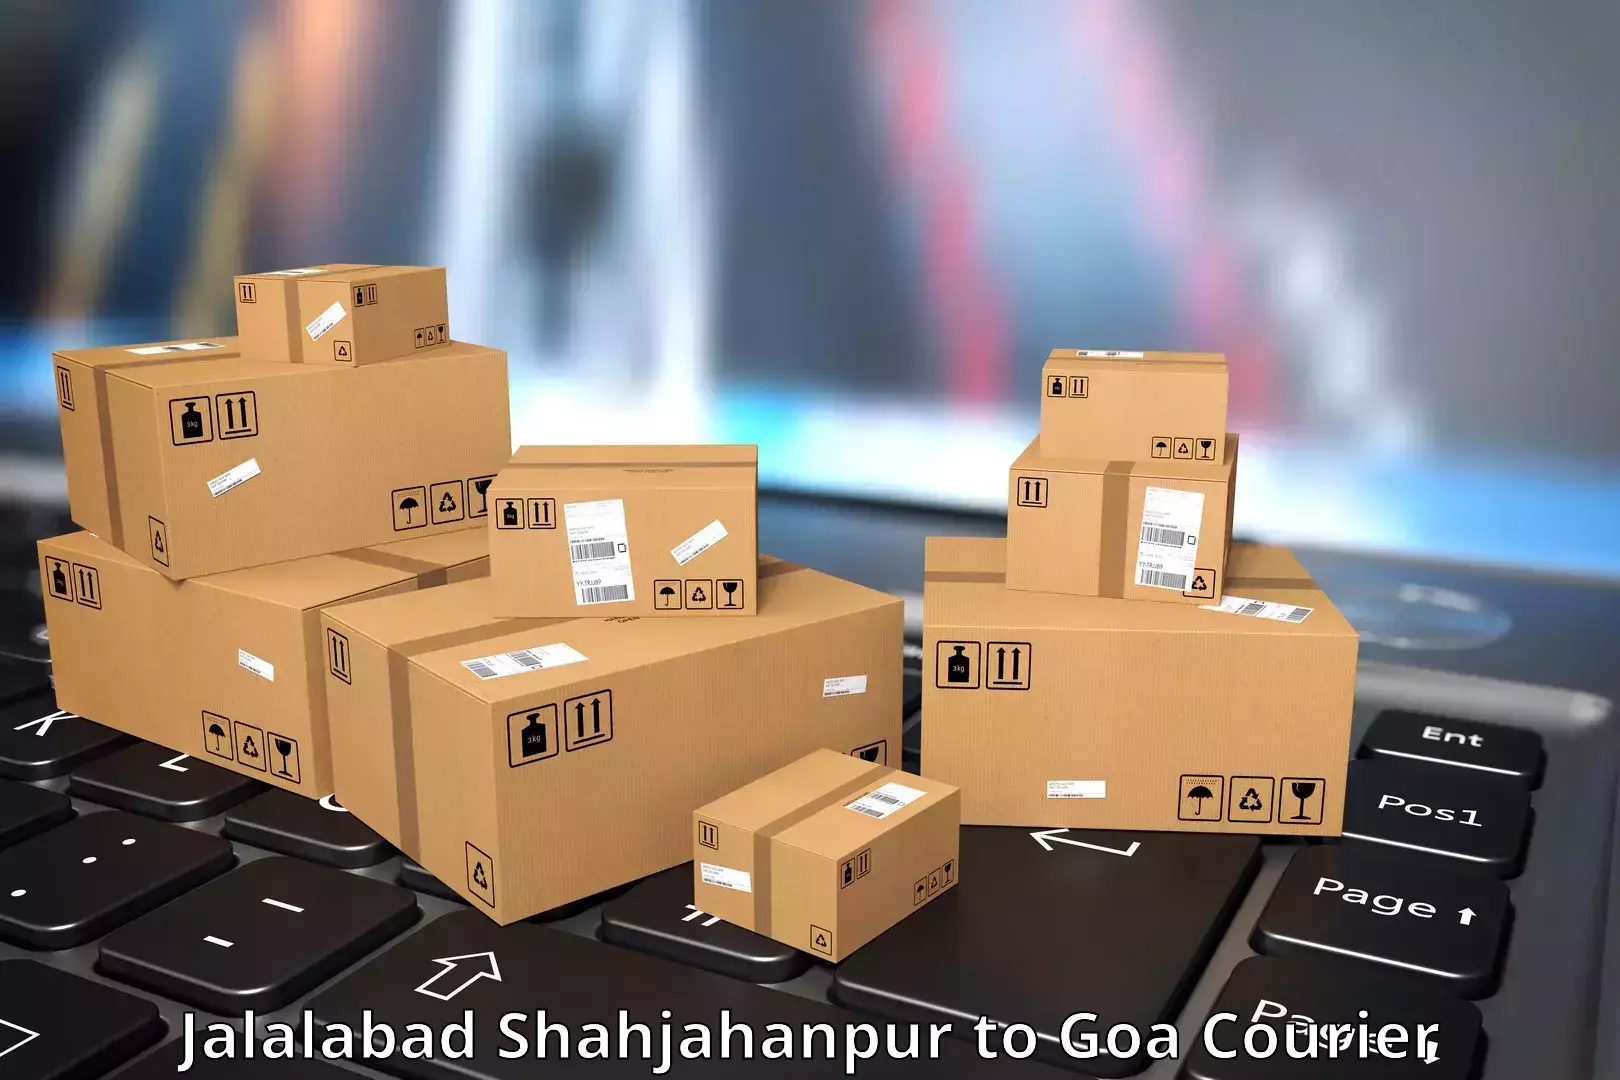 24-hour courier service in Jalalabad Shahjahanpur to Goa